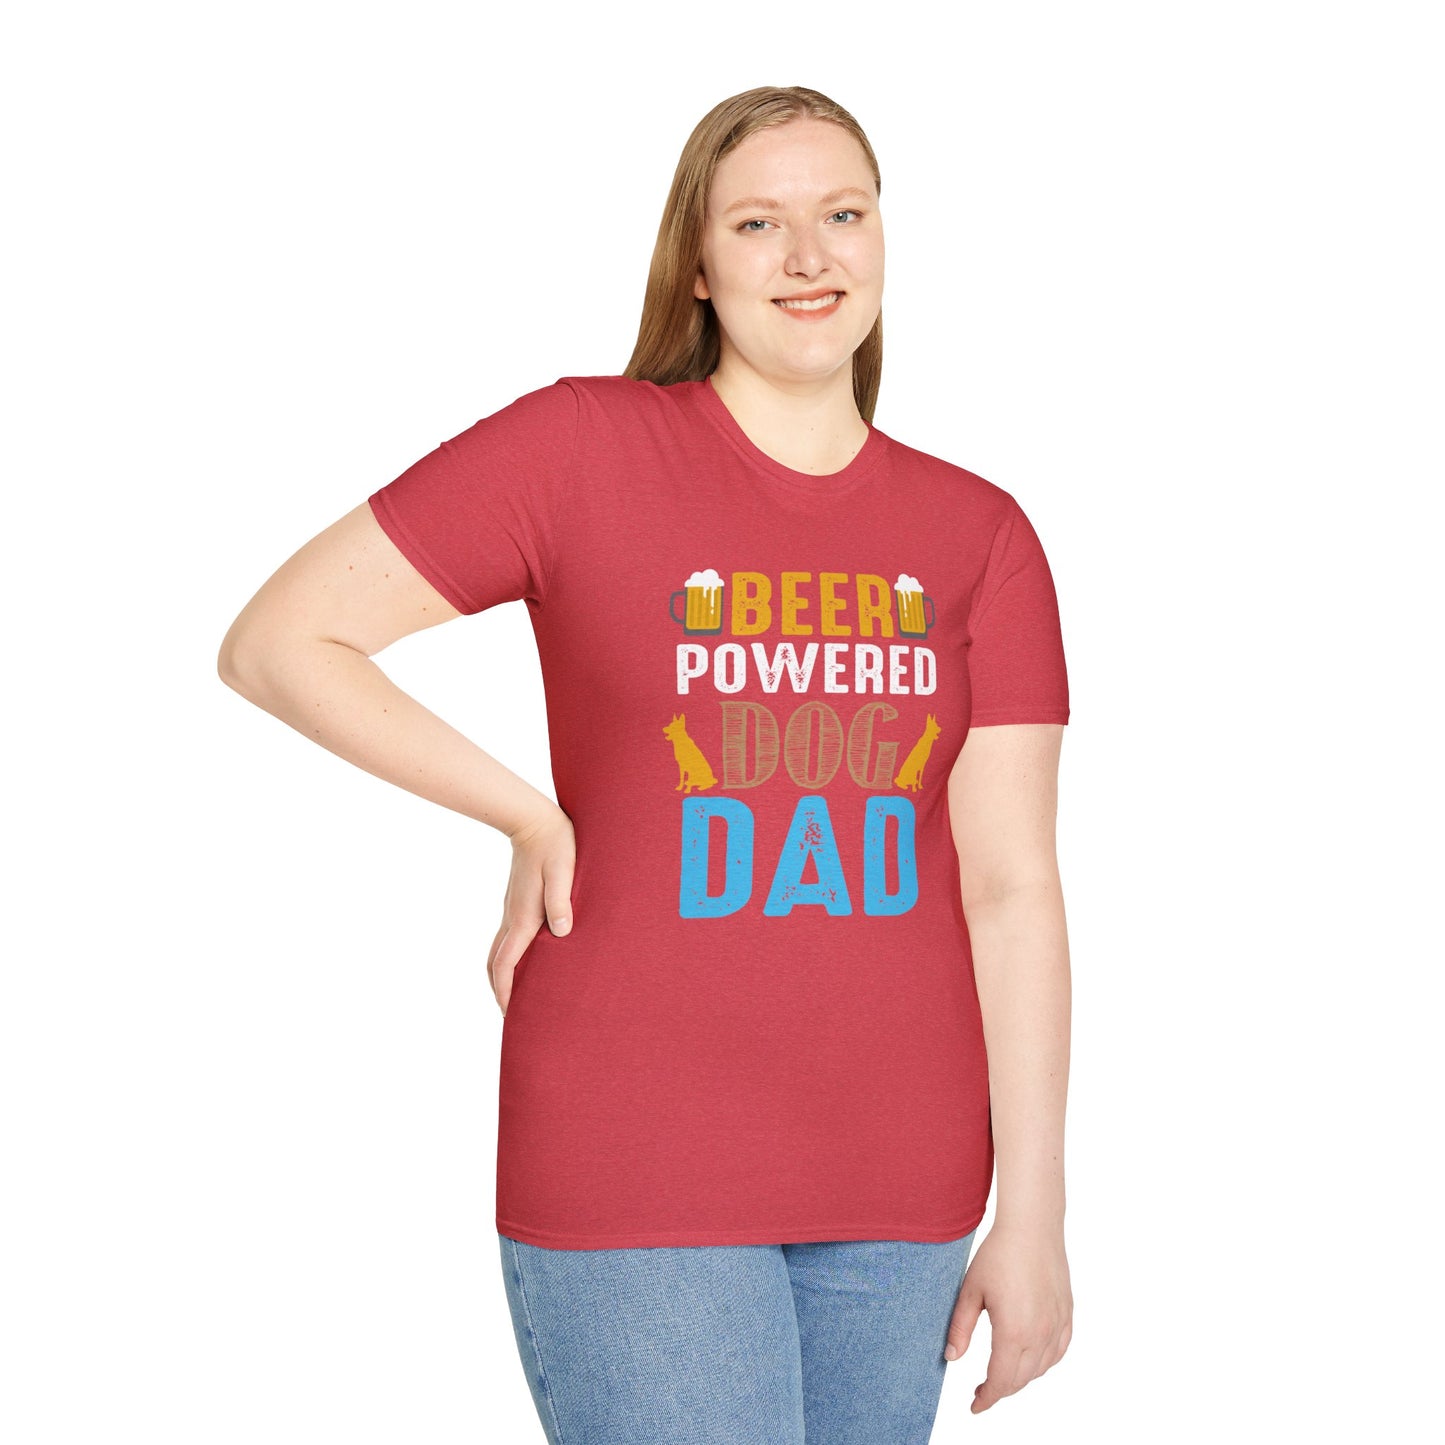 BEER POWERED DOG DAD Tee: Stylish and Comfortable Shirt for Pet-loving Fathers!